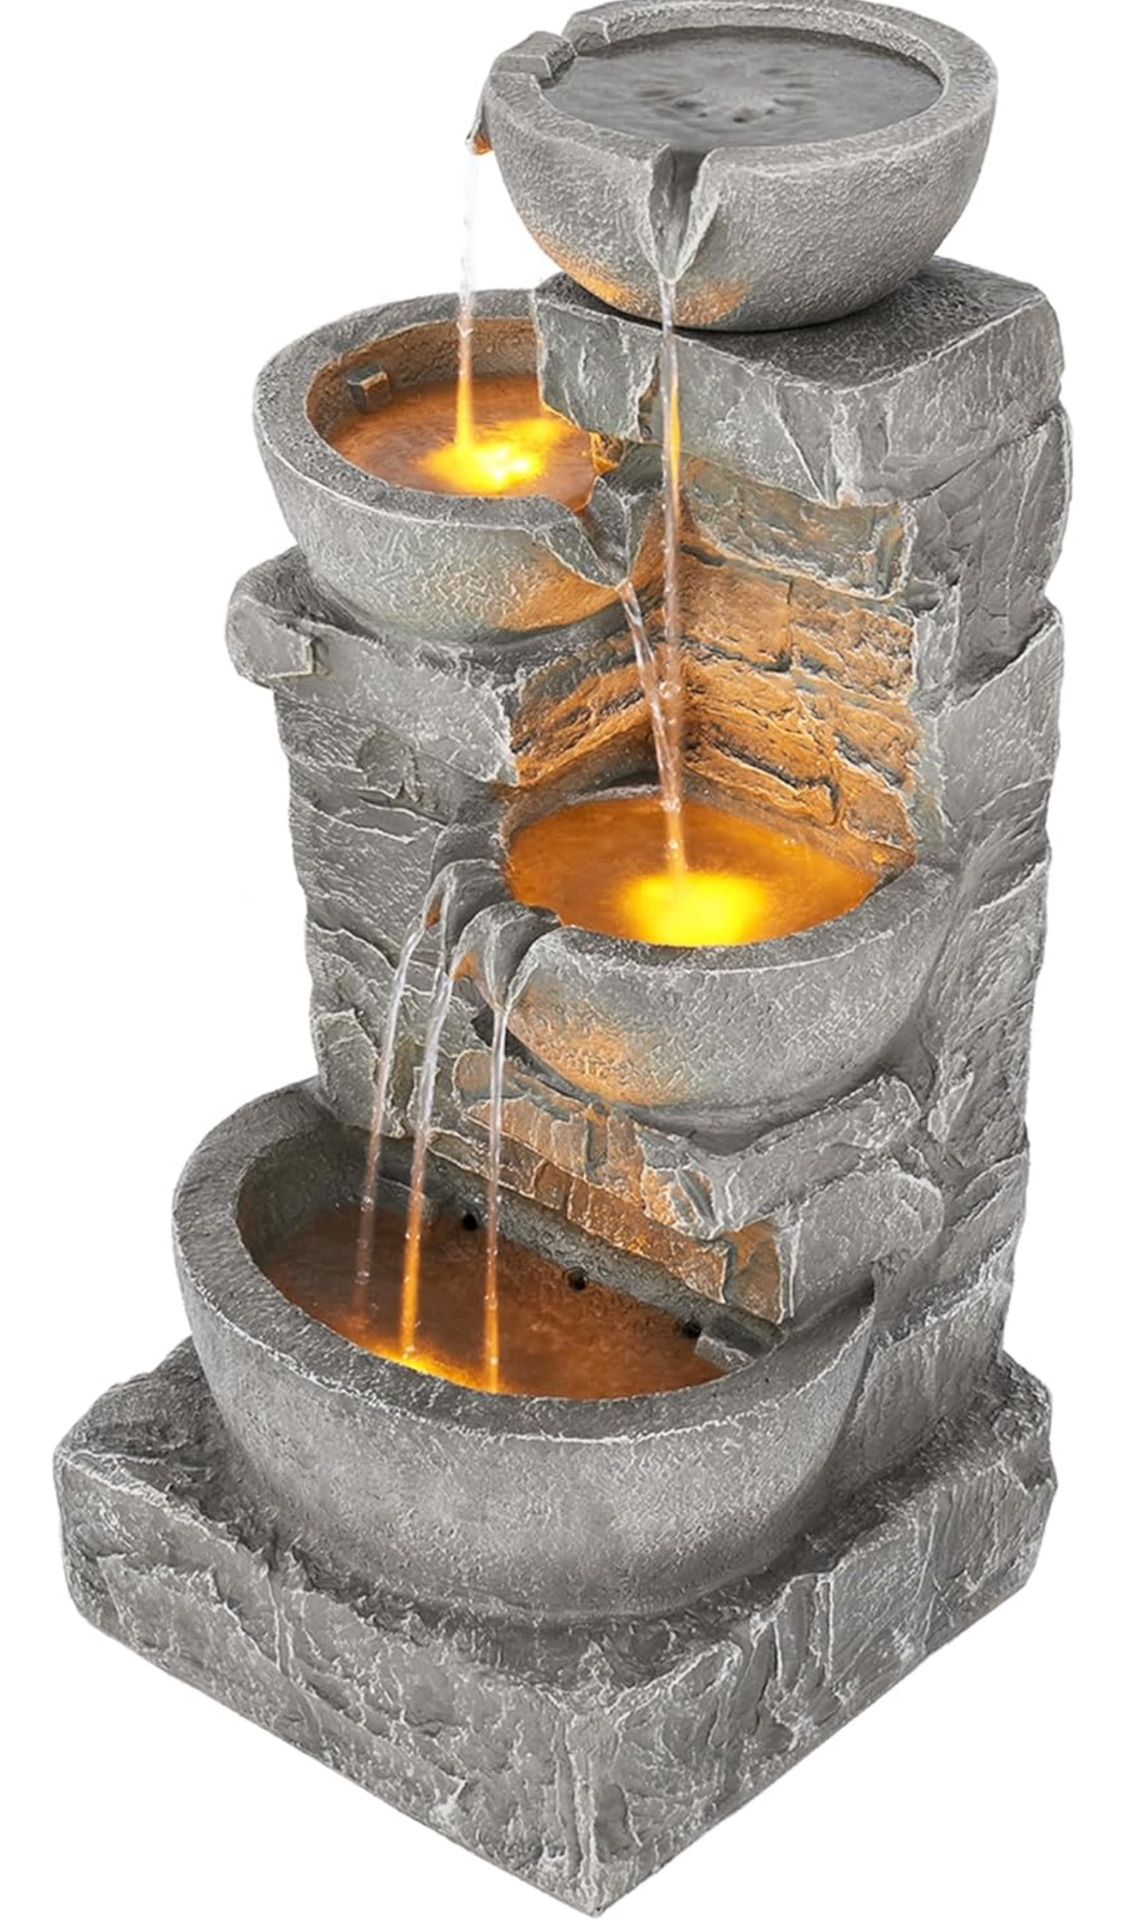 Teamson Home 33.25 in. Cascading Bowls and Stacked Stones LED Outdoor Water Fountain for Gardens, Landscaping, Patios, Balconies, and Lawns for a Calm